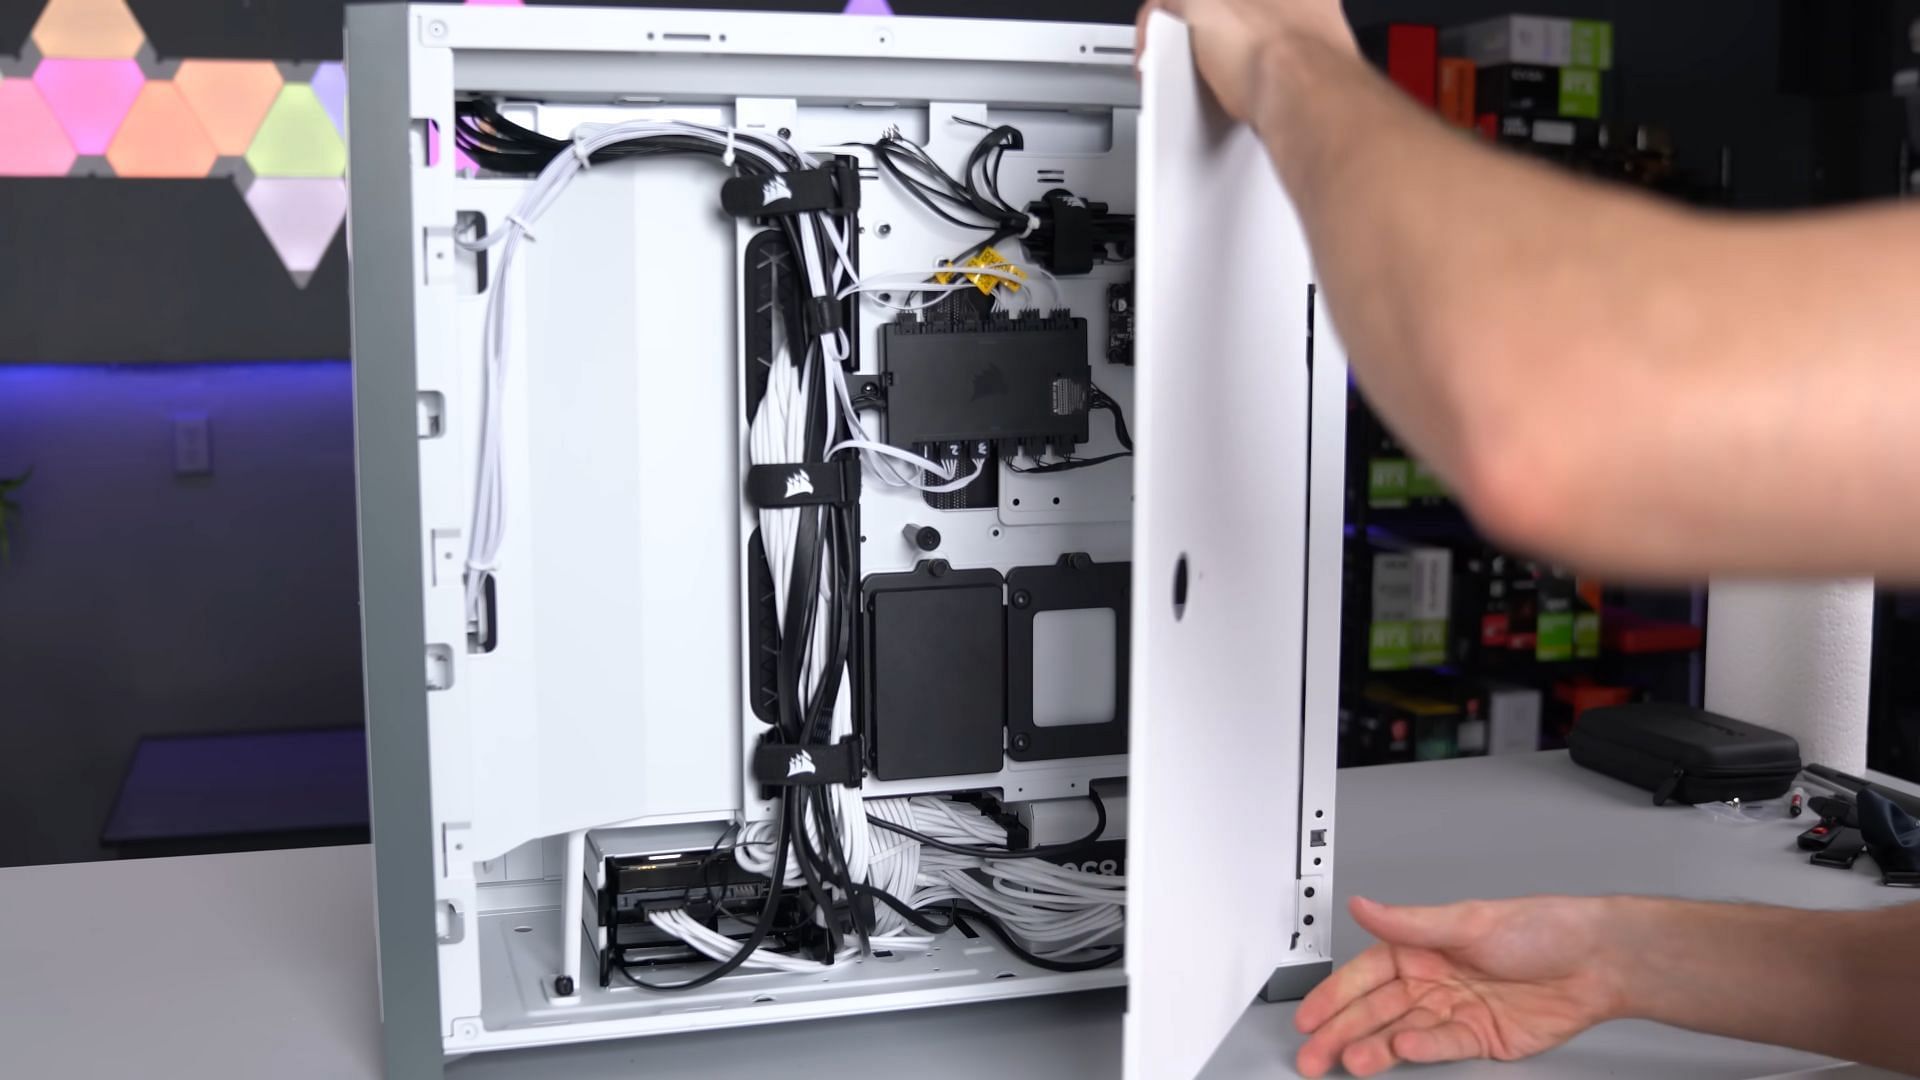 Cables are organized and the side panel is closed (Image via TechSource/YouTube)